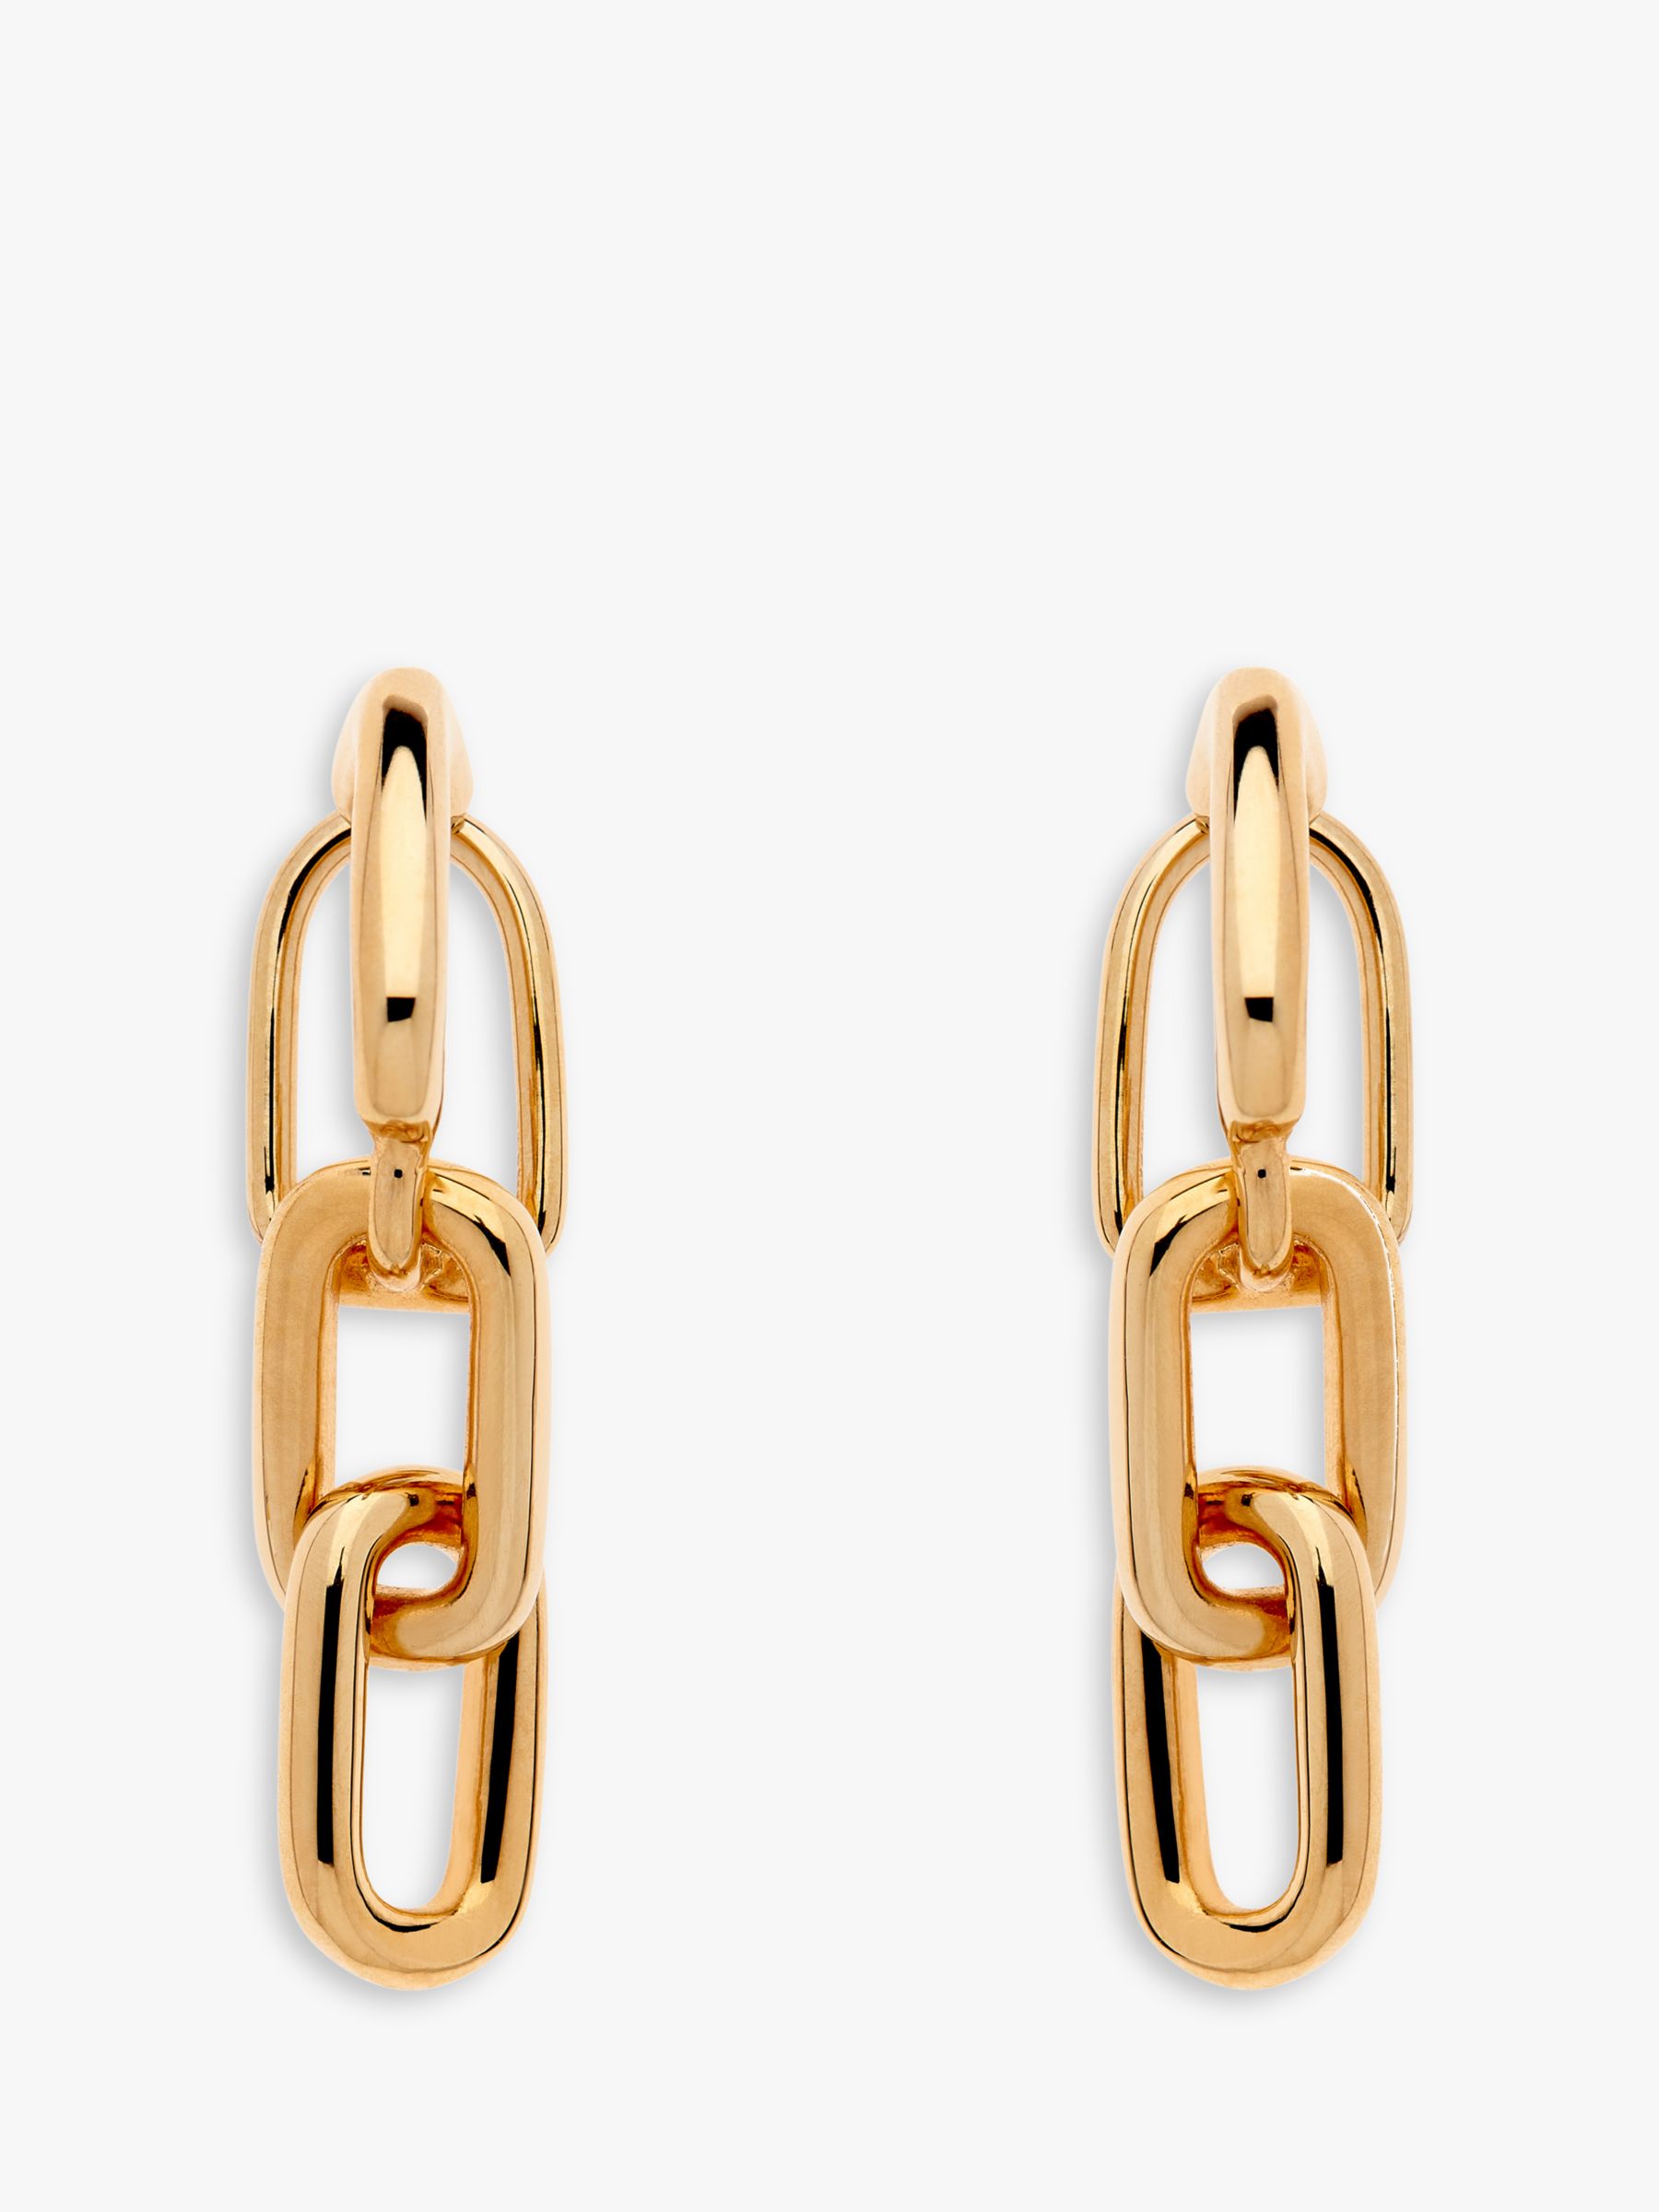 Emma Holland Chain Link Clip-On Drop Earrings, Gold at John Lewis ...